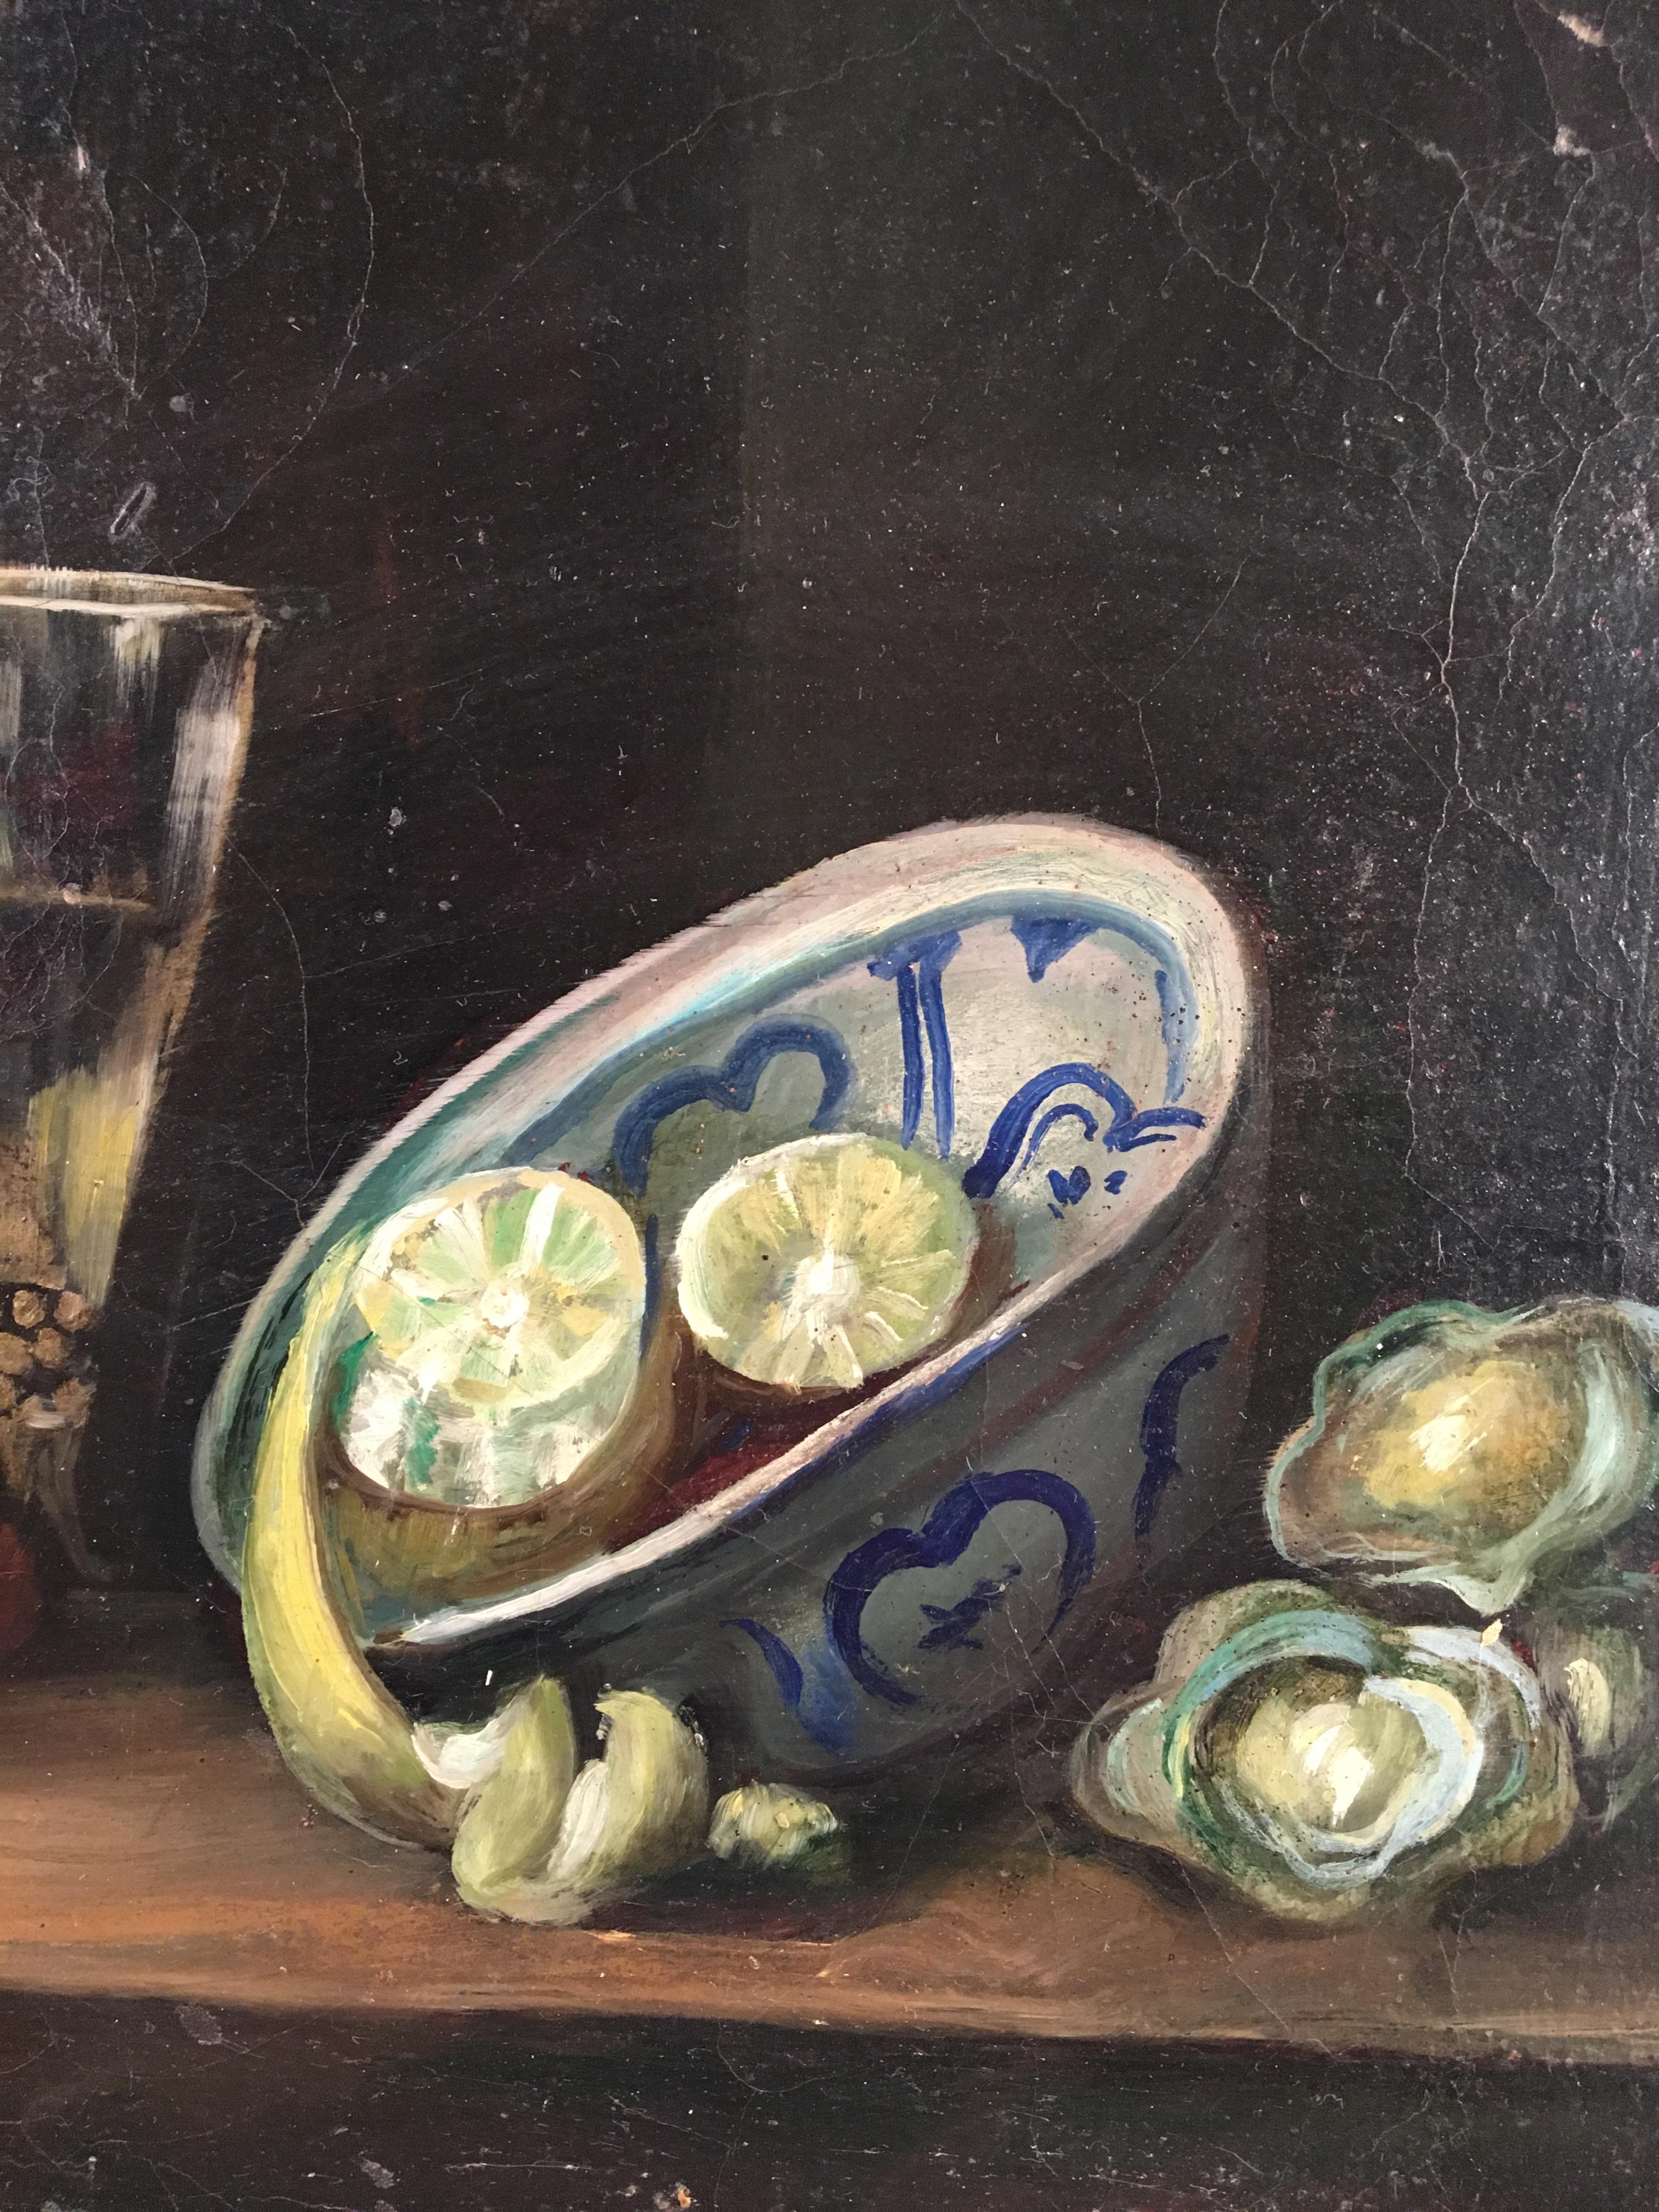 A French still life painting of a lobster, a vase with flowers, and other food items and utensils on a table, mid-19th century, oil on canvas. From the estate of Pierre Moulin, founder of Pierre Deux shops.